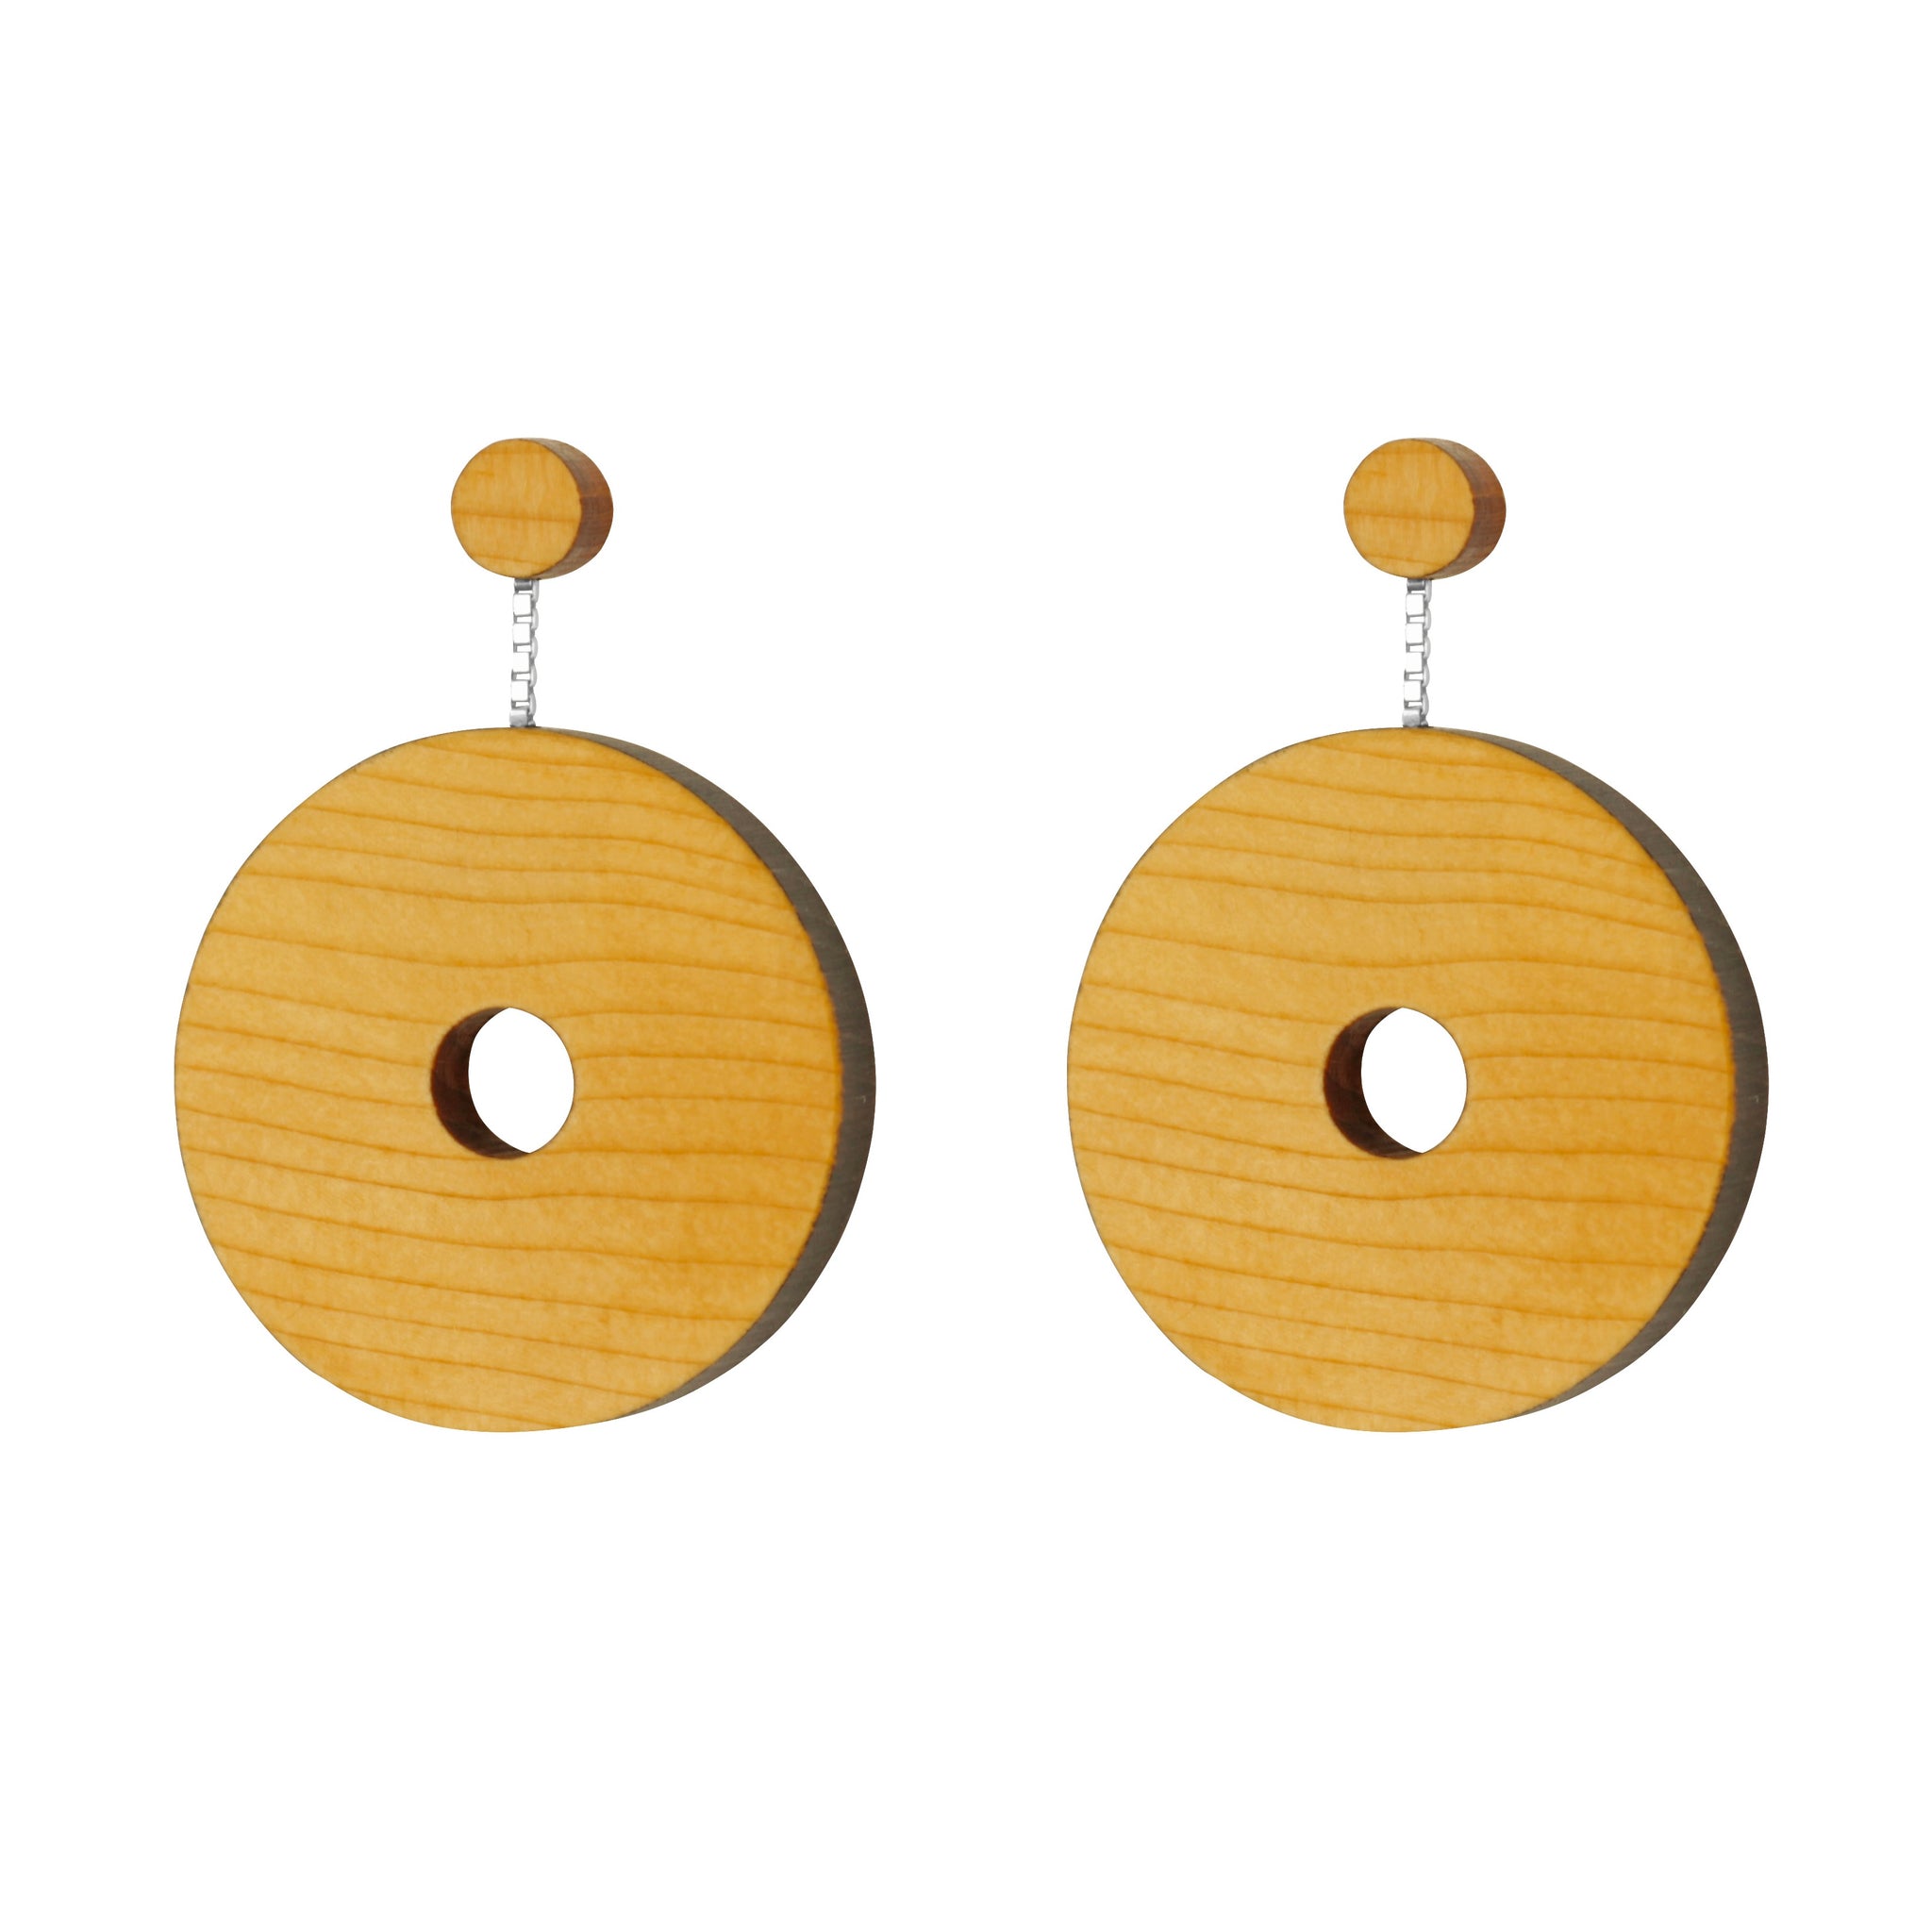 Oriel - Large and lightweight disc shaped drop earrings in Yew wood and sterling silver - handmade in Ireland by Rowena Sheen 